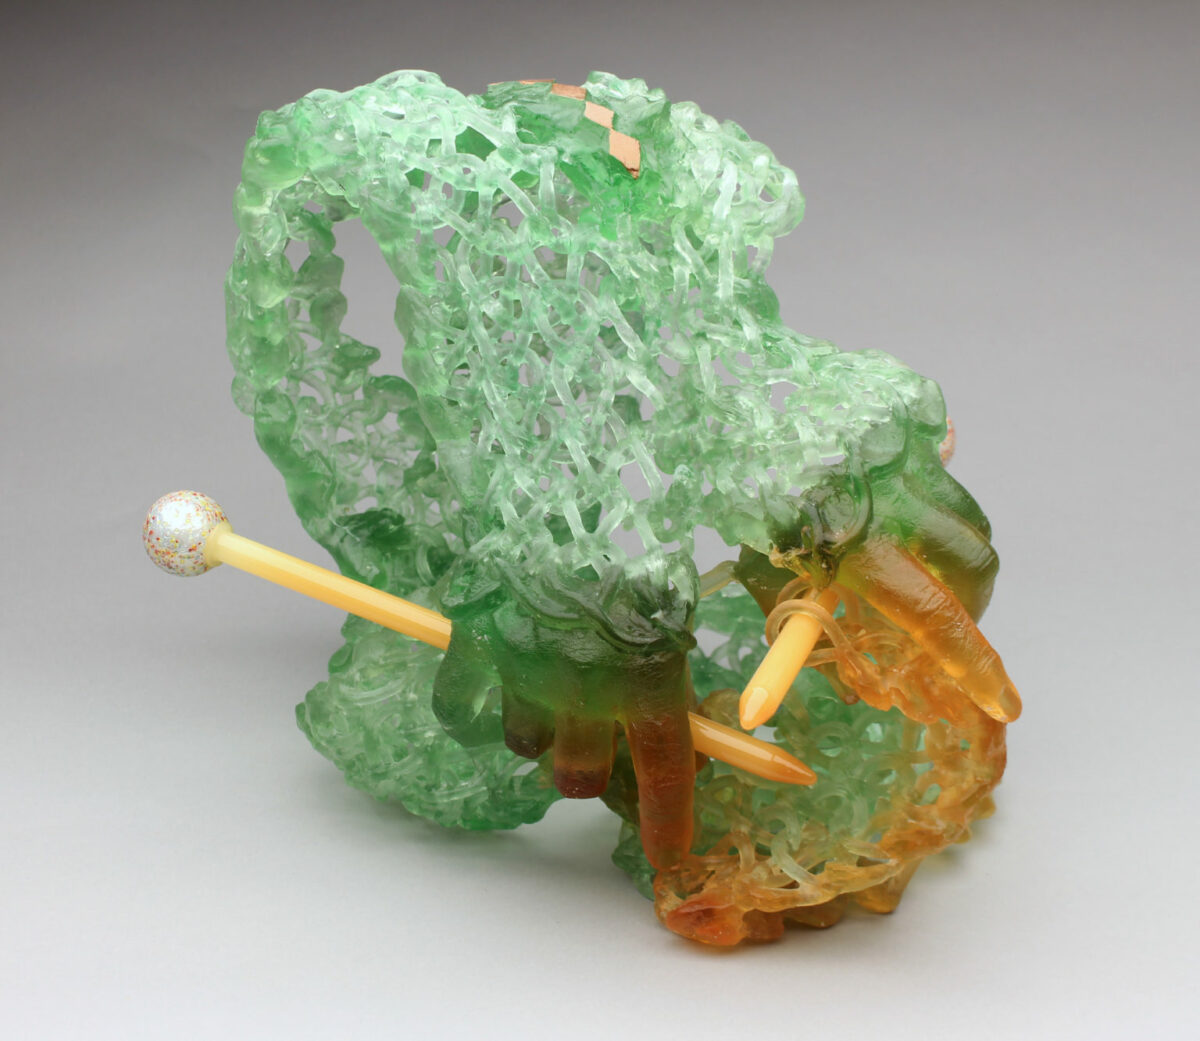 Knitted Glass, Fiber Inspired Sculptures By Carol Milne (5)